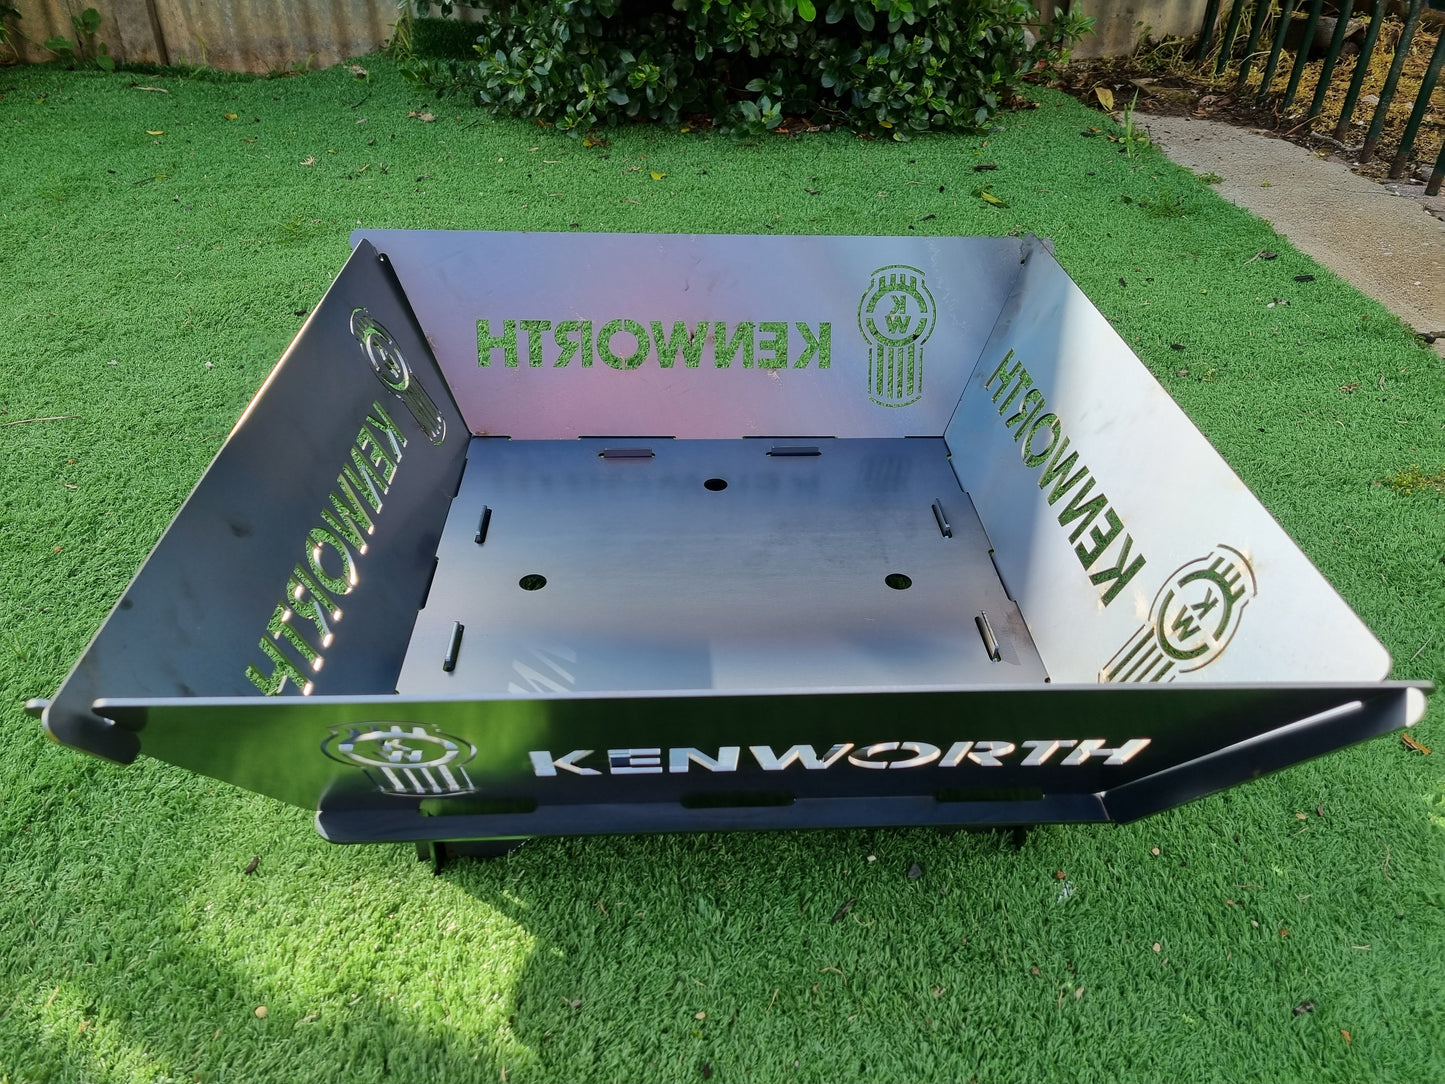 Kenworth Trucks Fire Pit Collapsible 3mm Thick Australian Steel